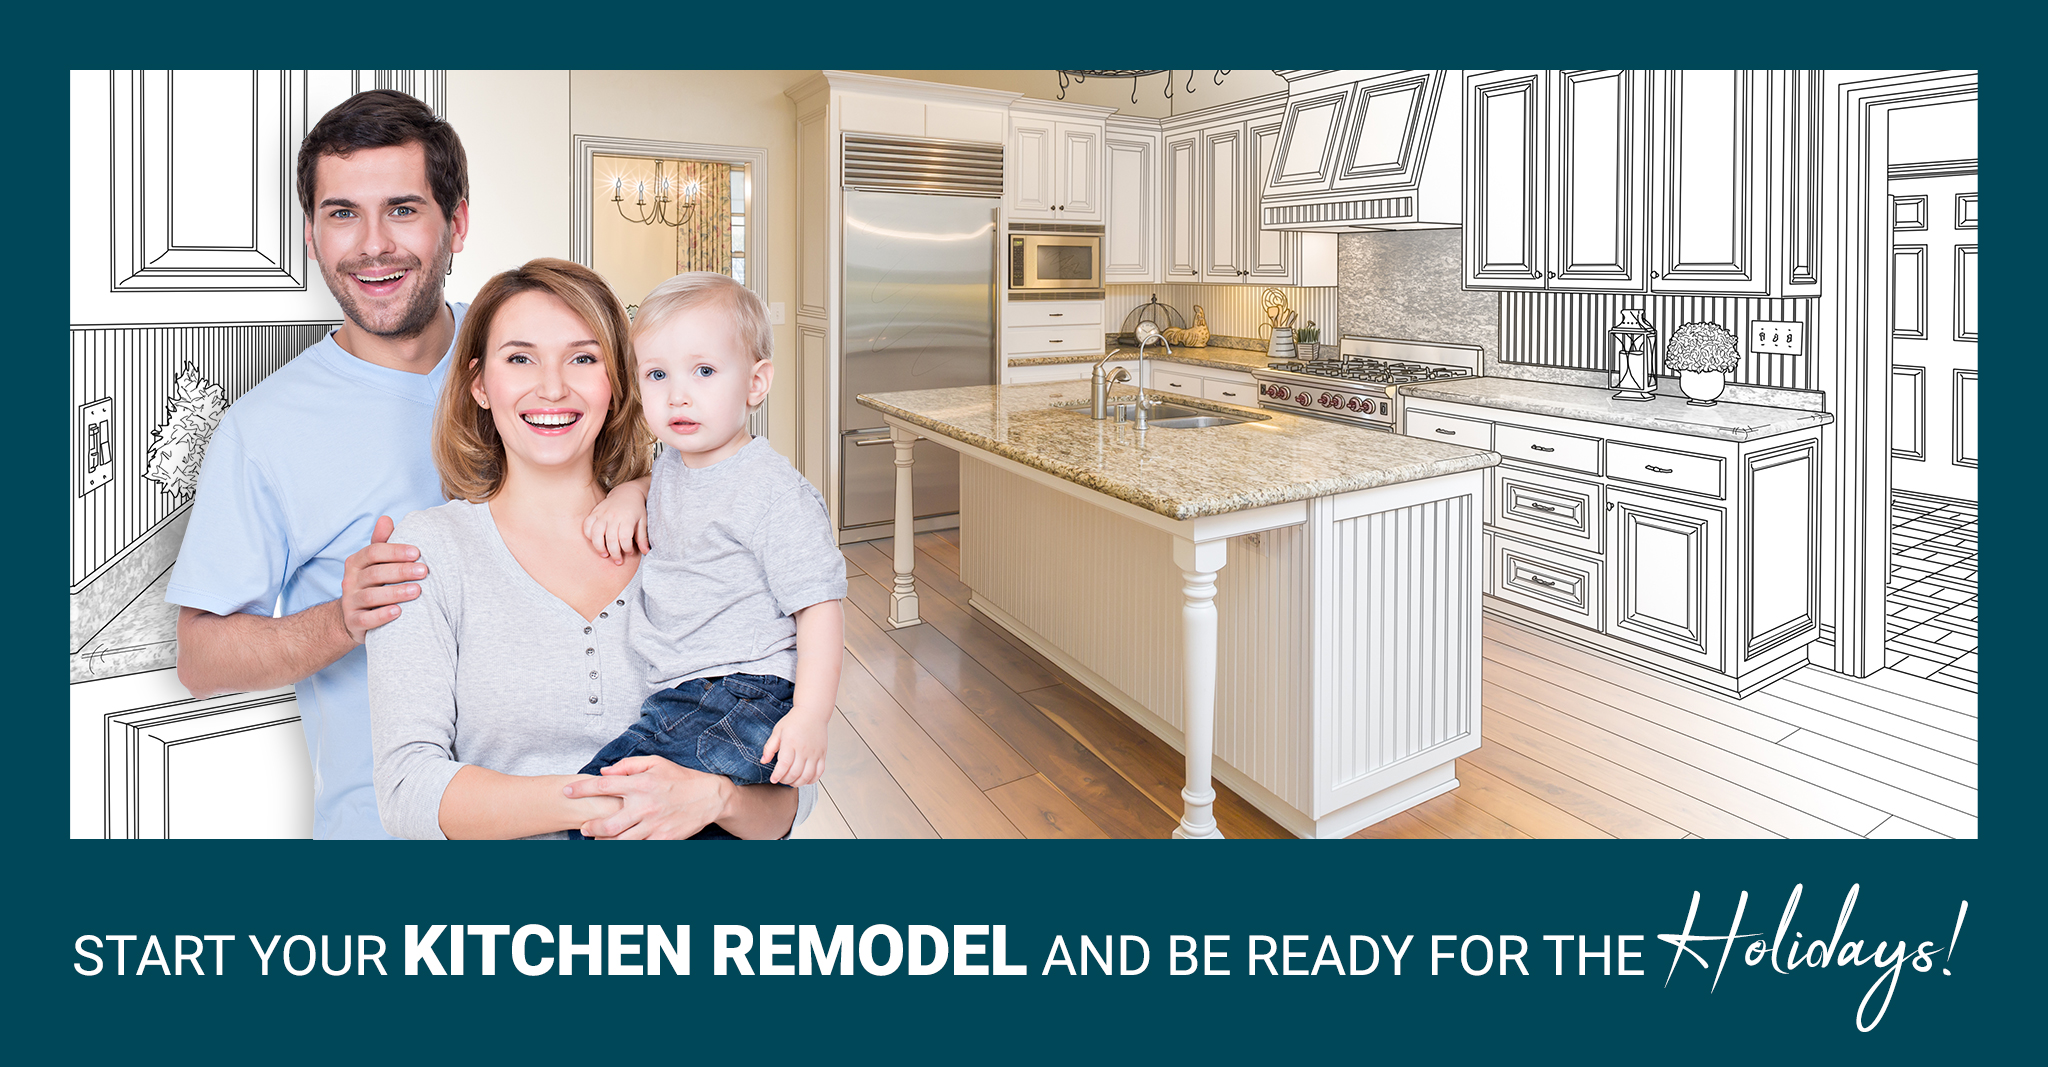 Start Your Kitchen Remodel and Be Ready for the Holidays!